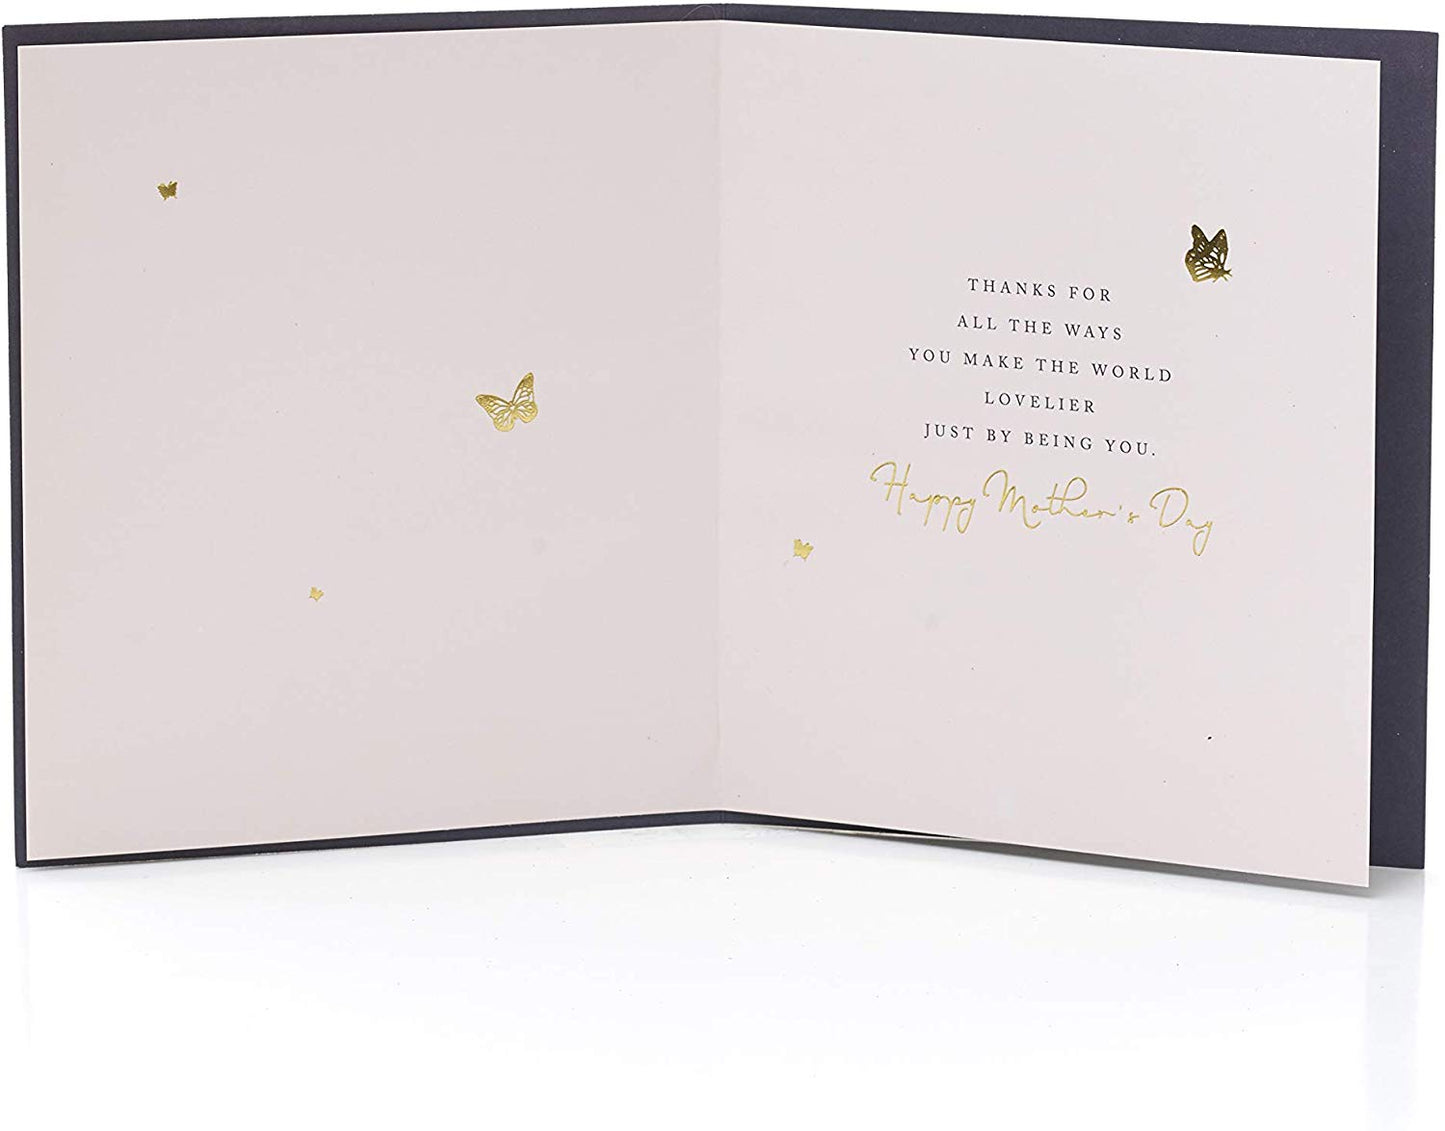 Someone Special Butterflies Gold Finished Mother's Day Card